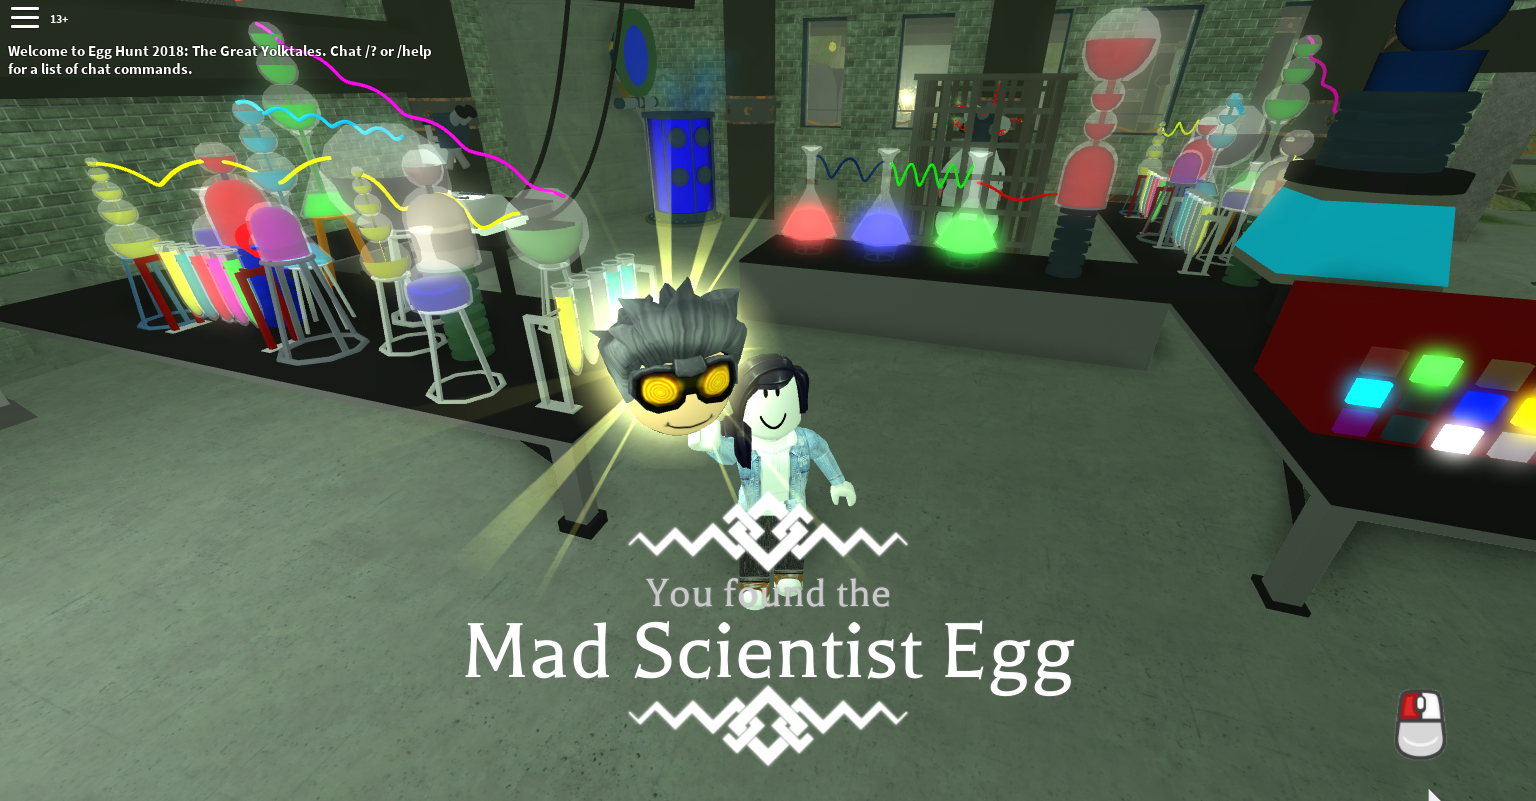 Aveyn S Blog Roblox Egg Hunt 2018 How To Find All The Eggs In Stein S Basement - hunting the alex egg roblox egg hunt 2018 solobengamer